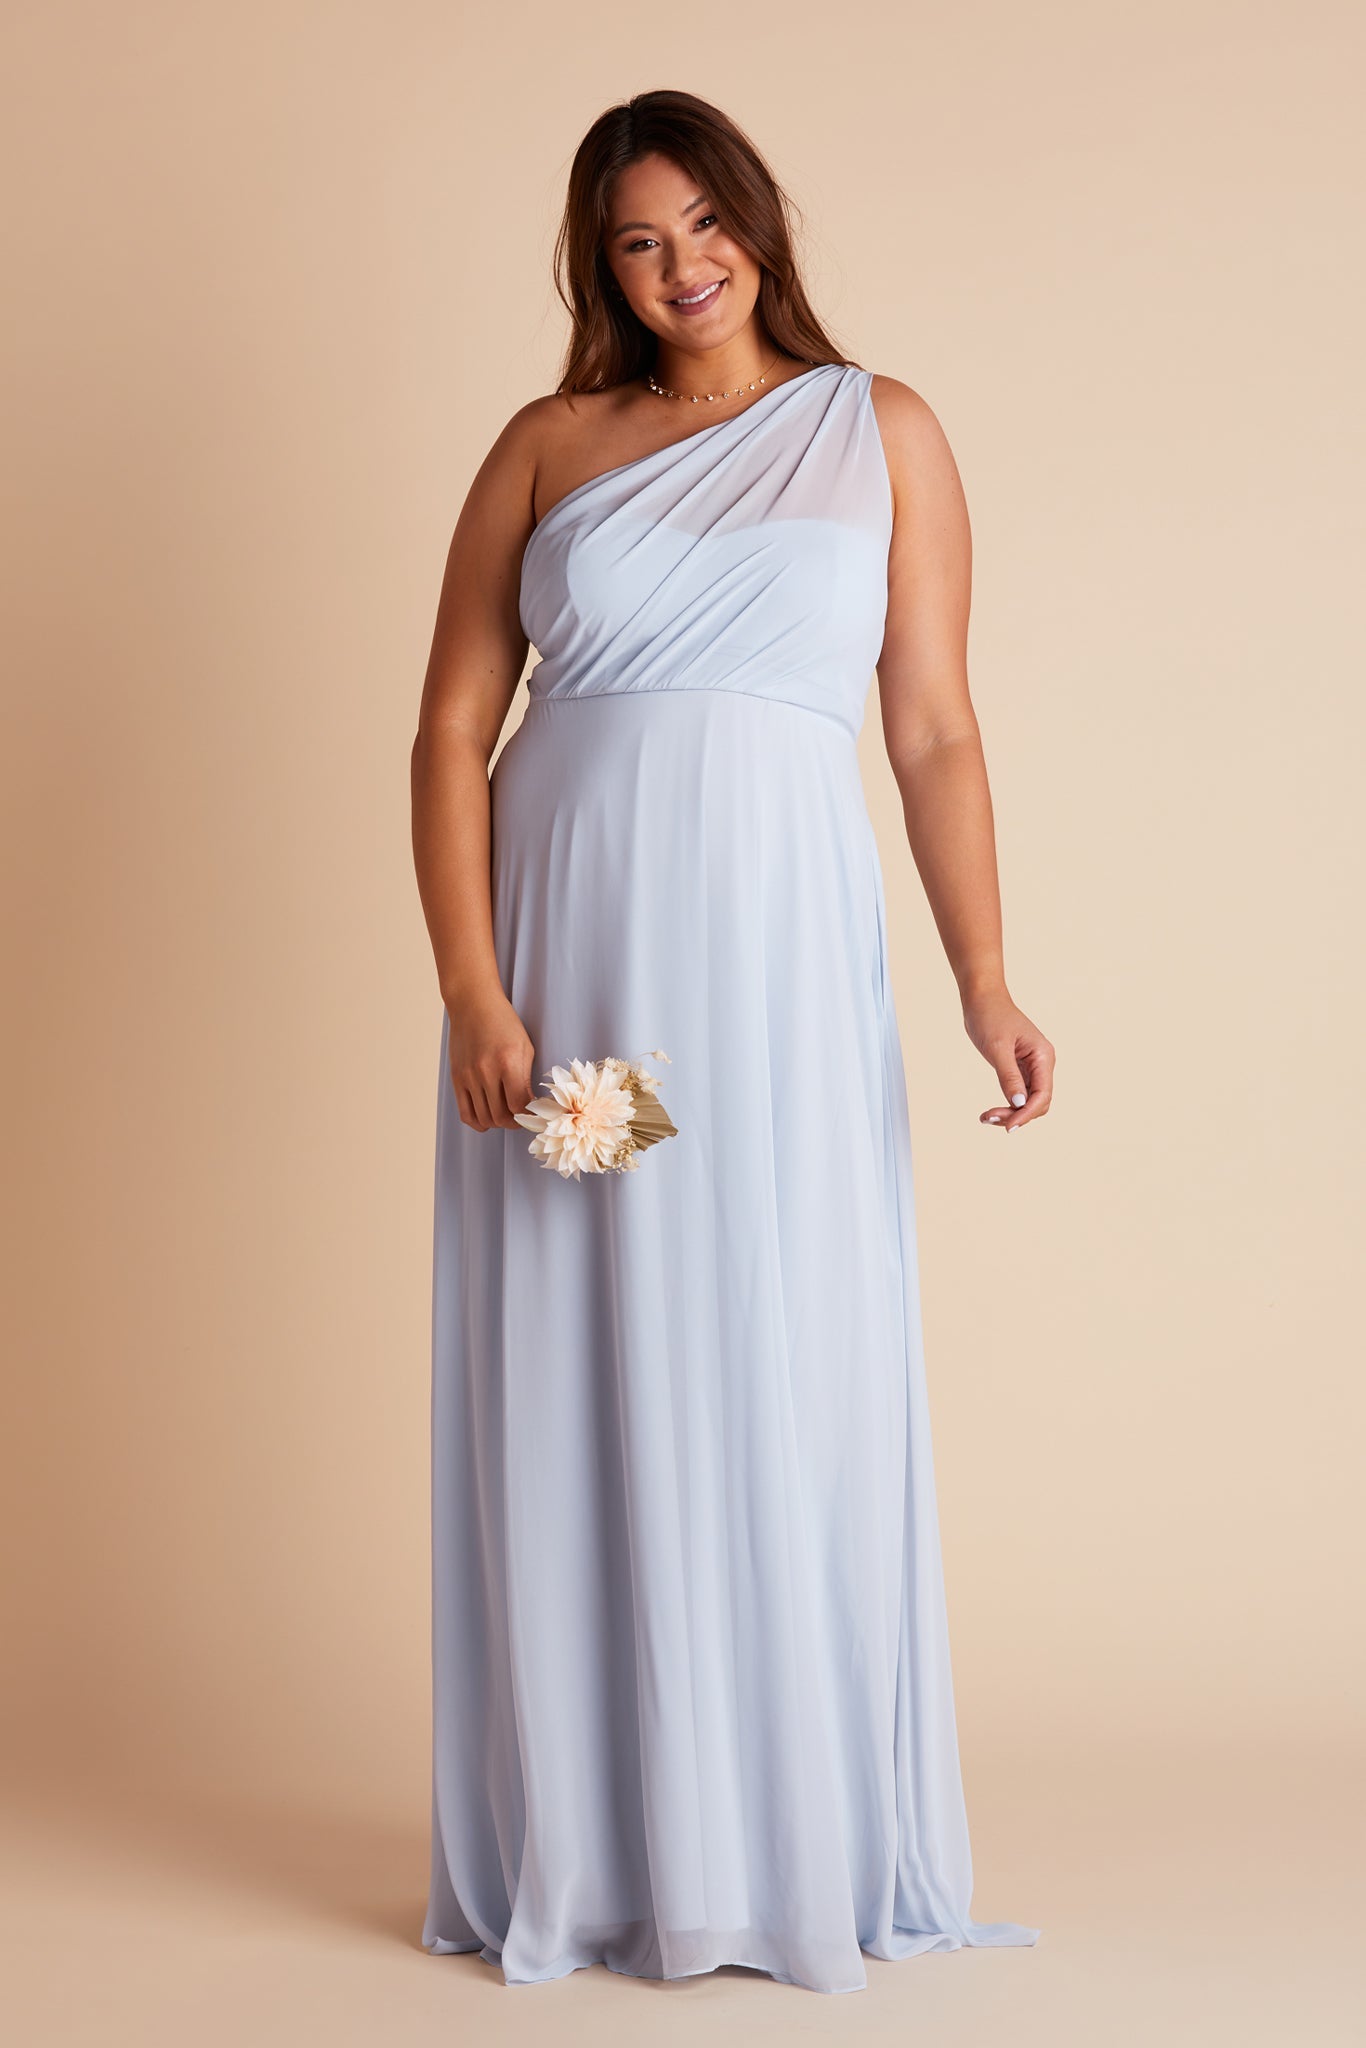 Kira plus size bridesmaids dress in ice blue chiffon by Birdy Grey, front view